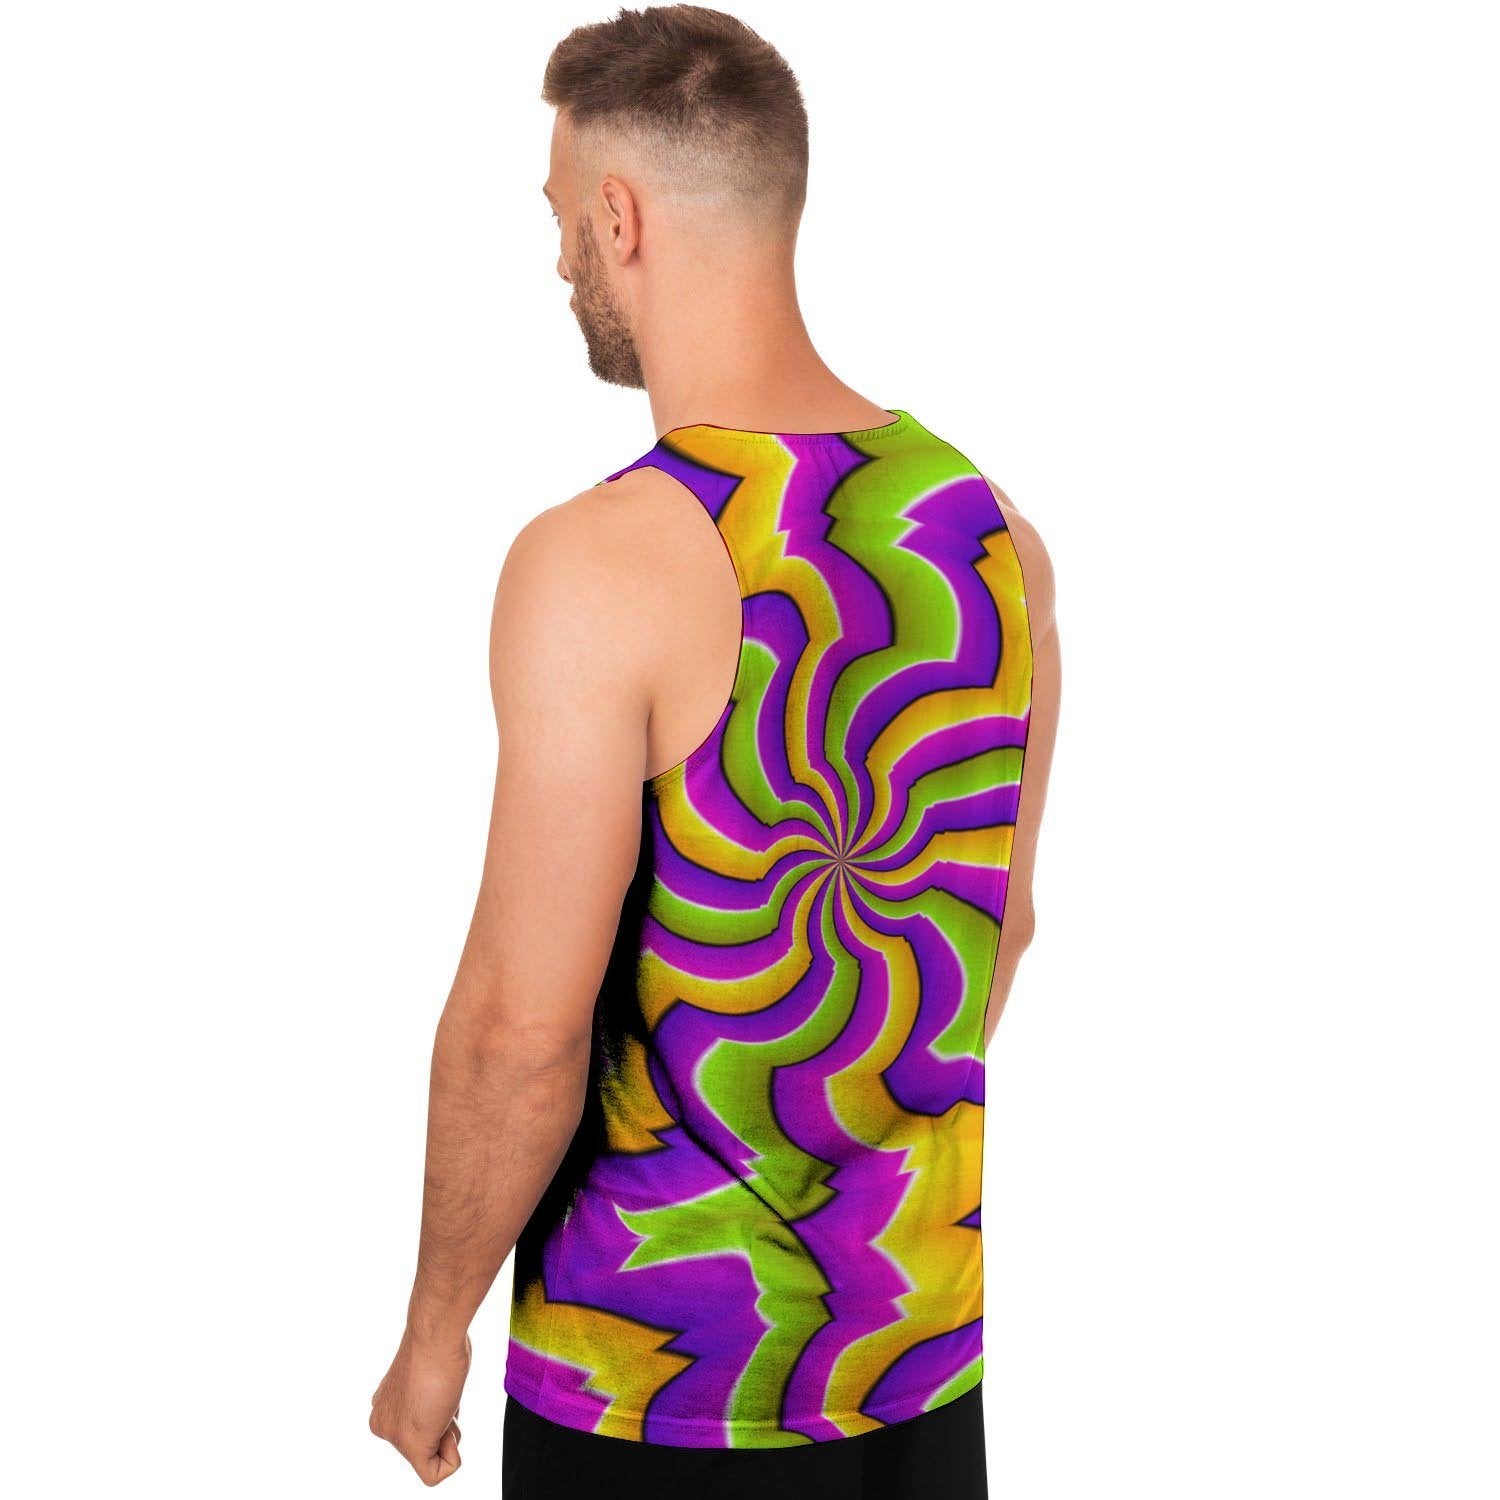 Zigzag Psychedelic Optical illusion Men's Tank Tops-grizzshop